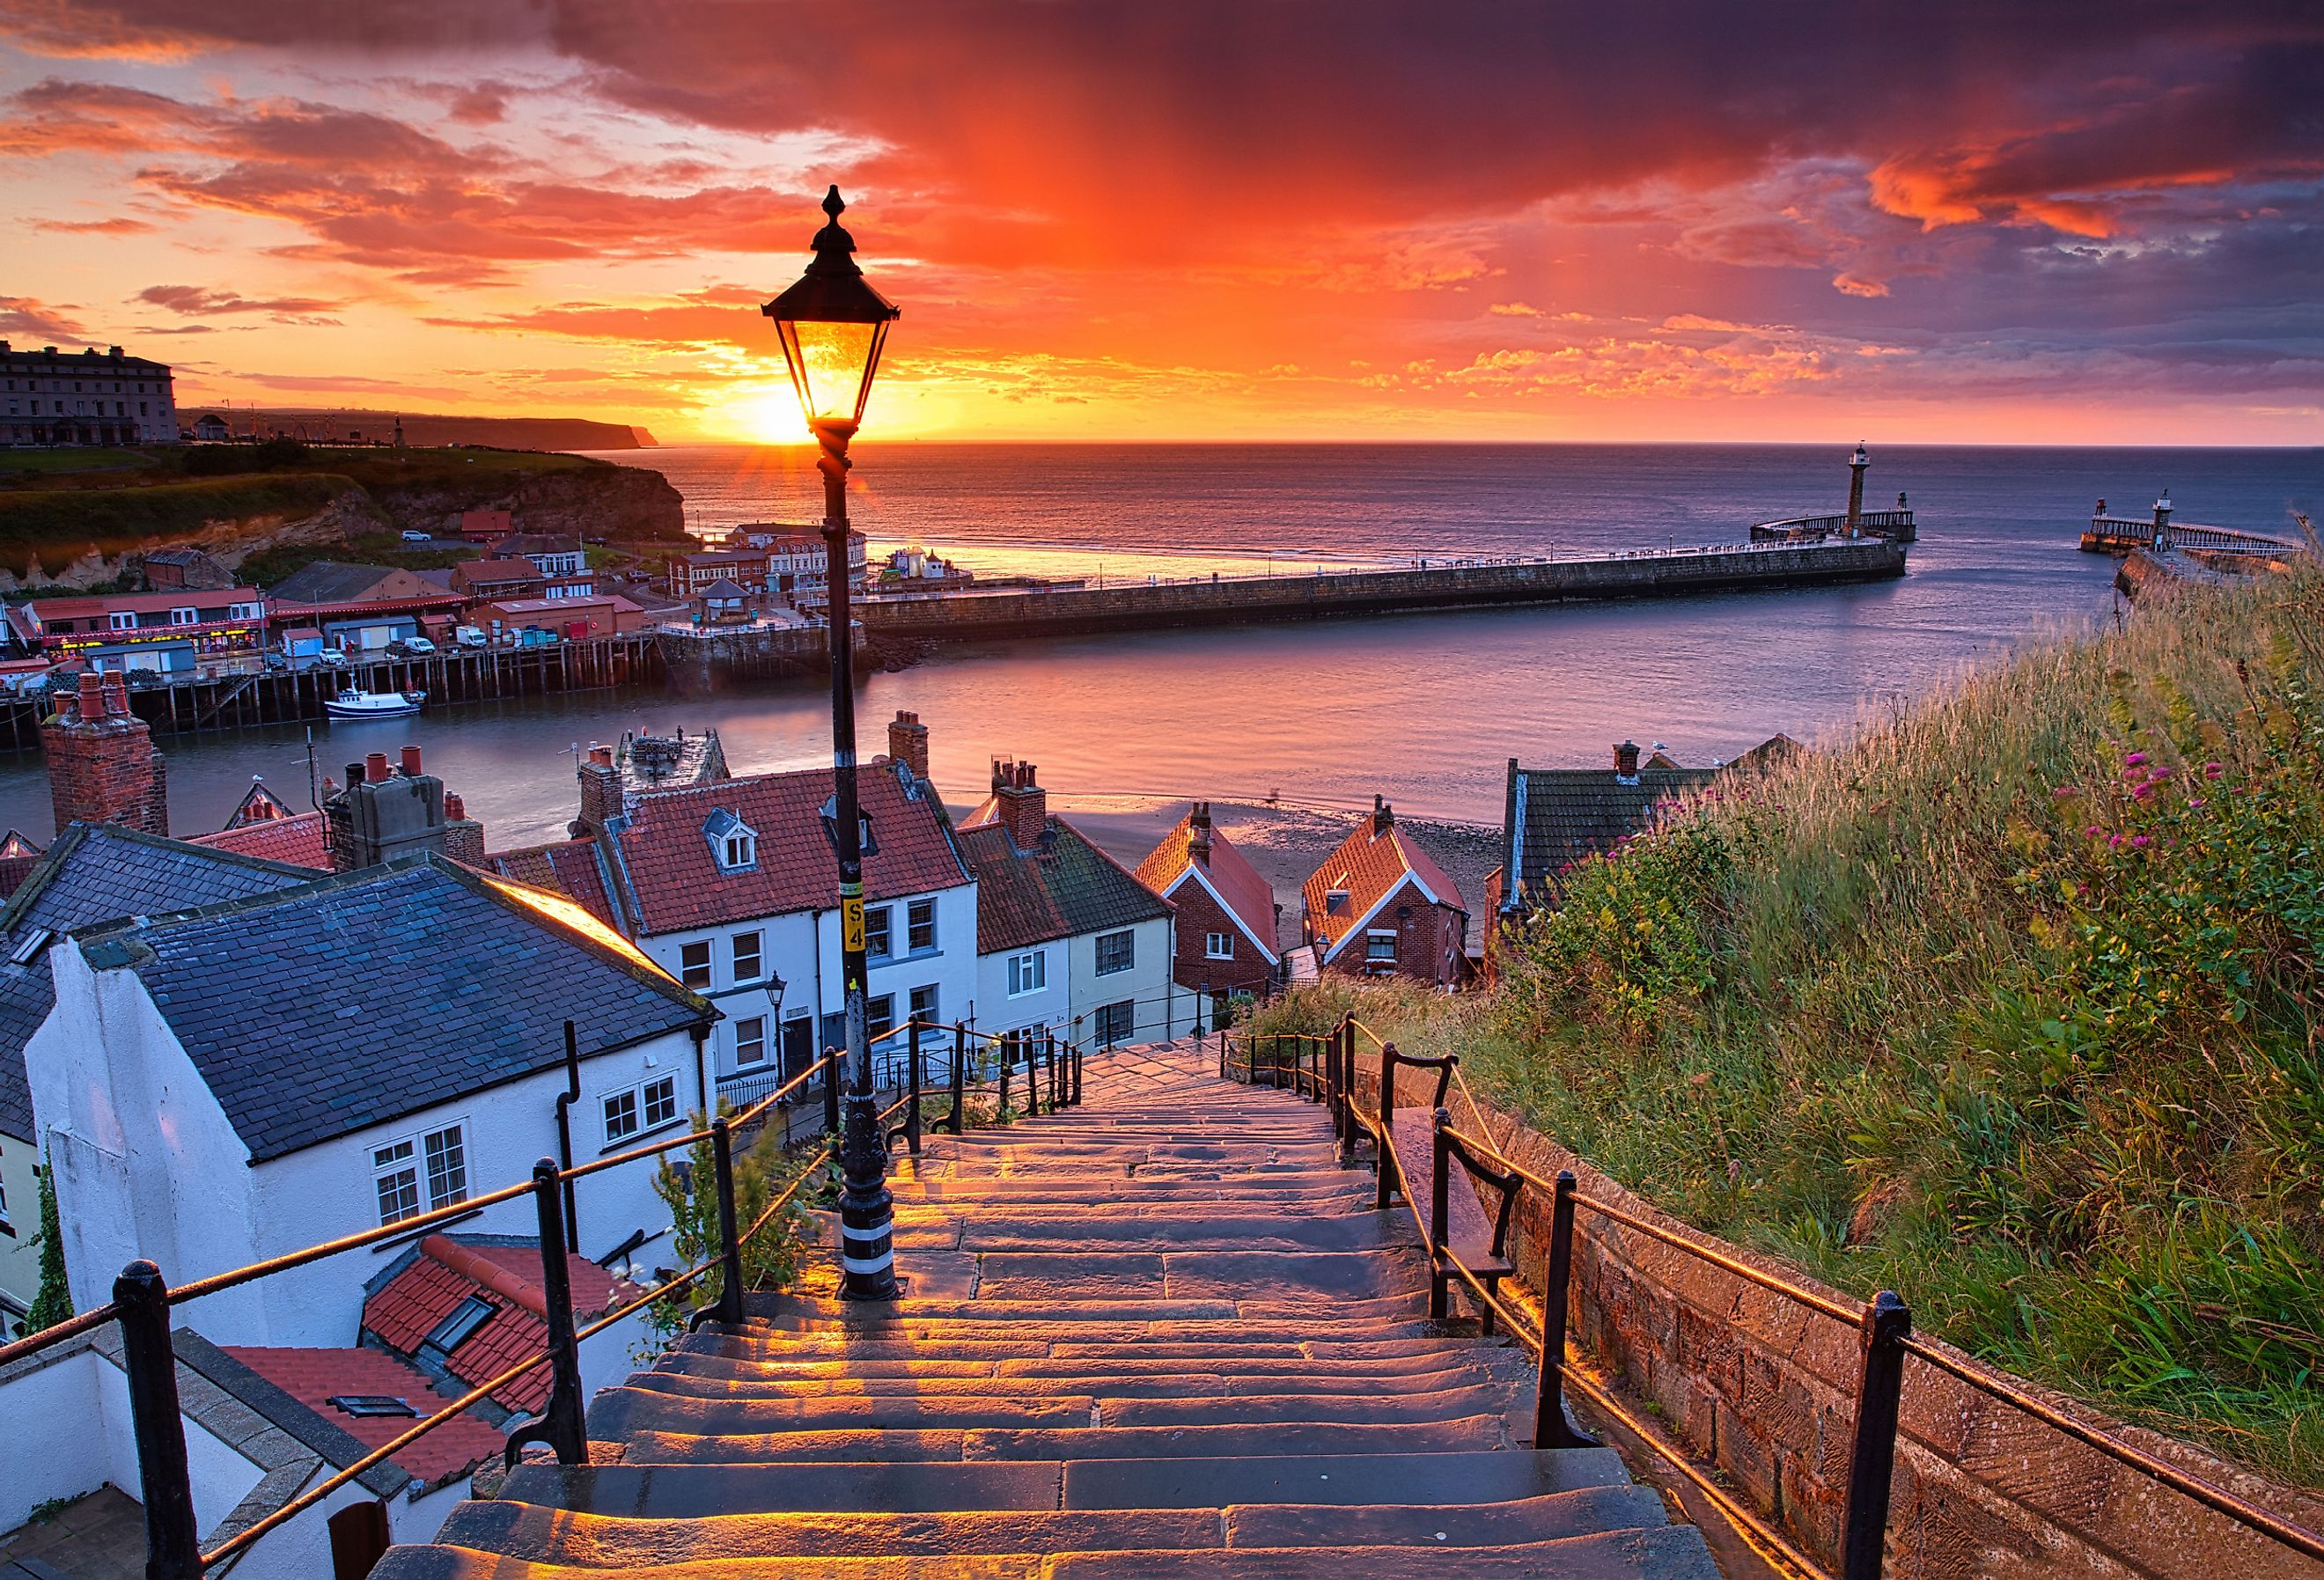 Dramatic sunset at Whitby, Yorkshire, after a rain shower.